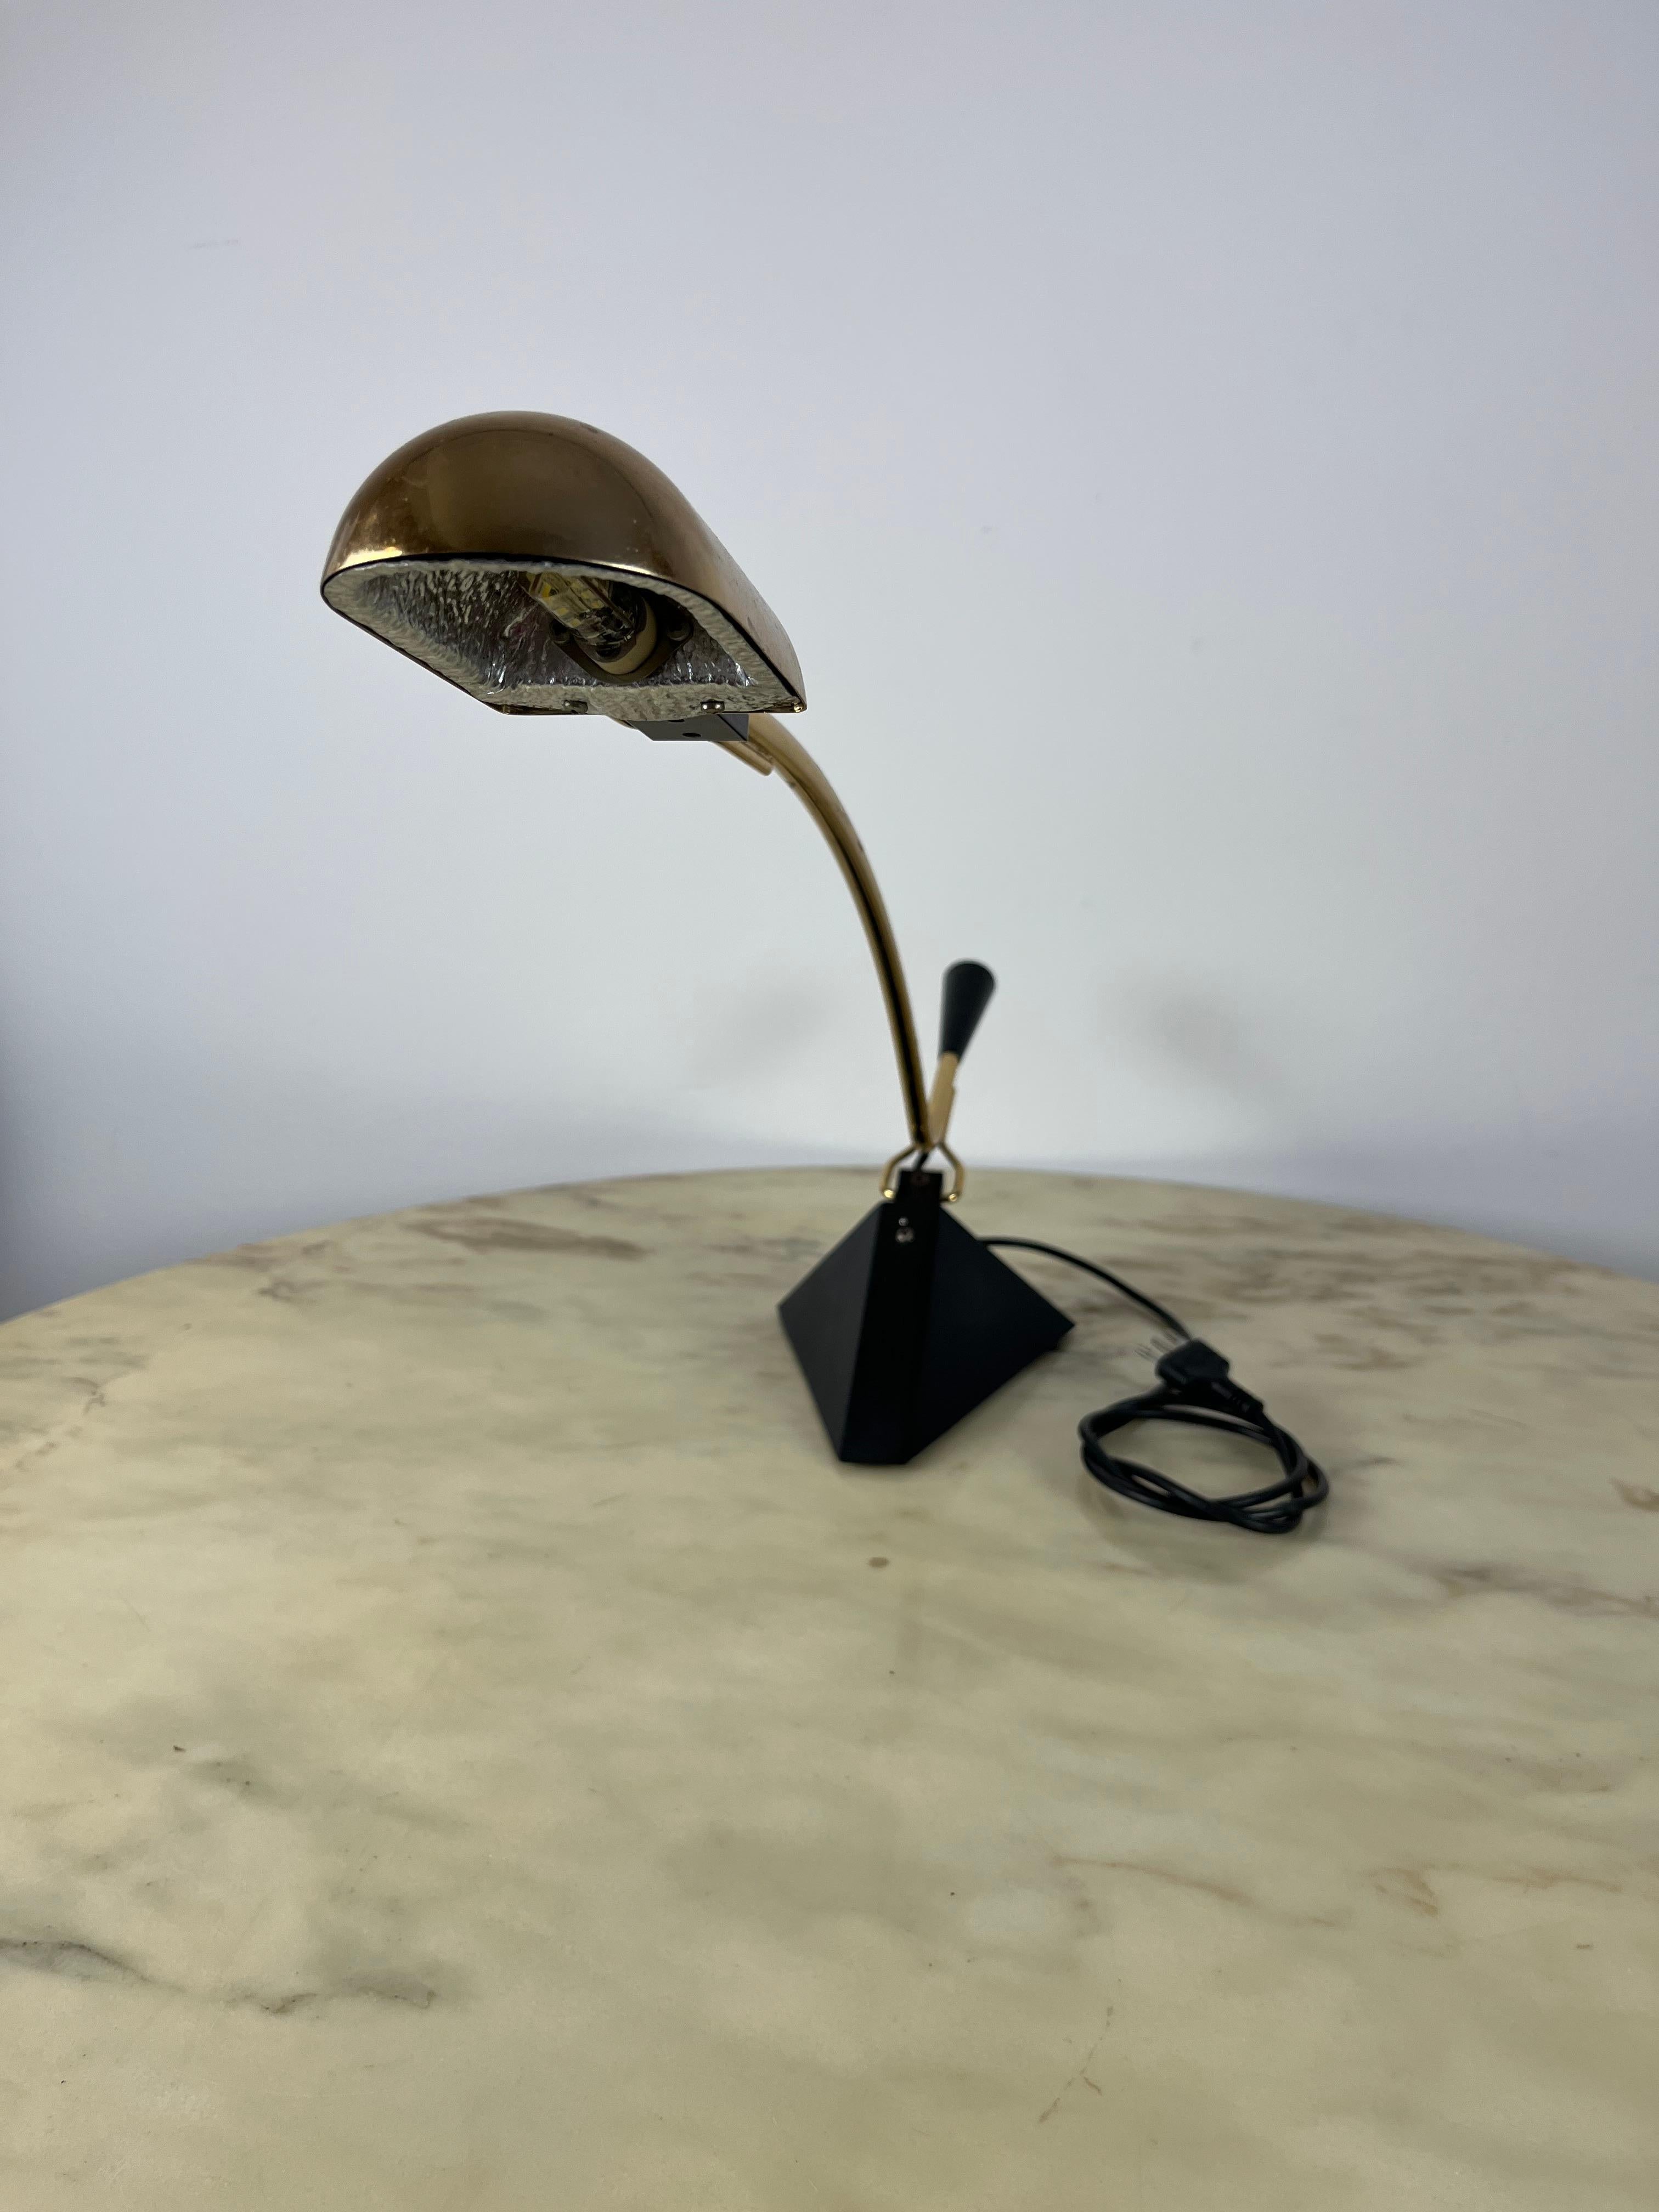 Albani table lamp, Italy, 1980.
Made in golden metal. It has small blemishes, scratches and stains on the stem, as evidenced by the photograph. Working.
Ideal for a professional's desk.